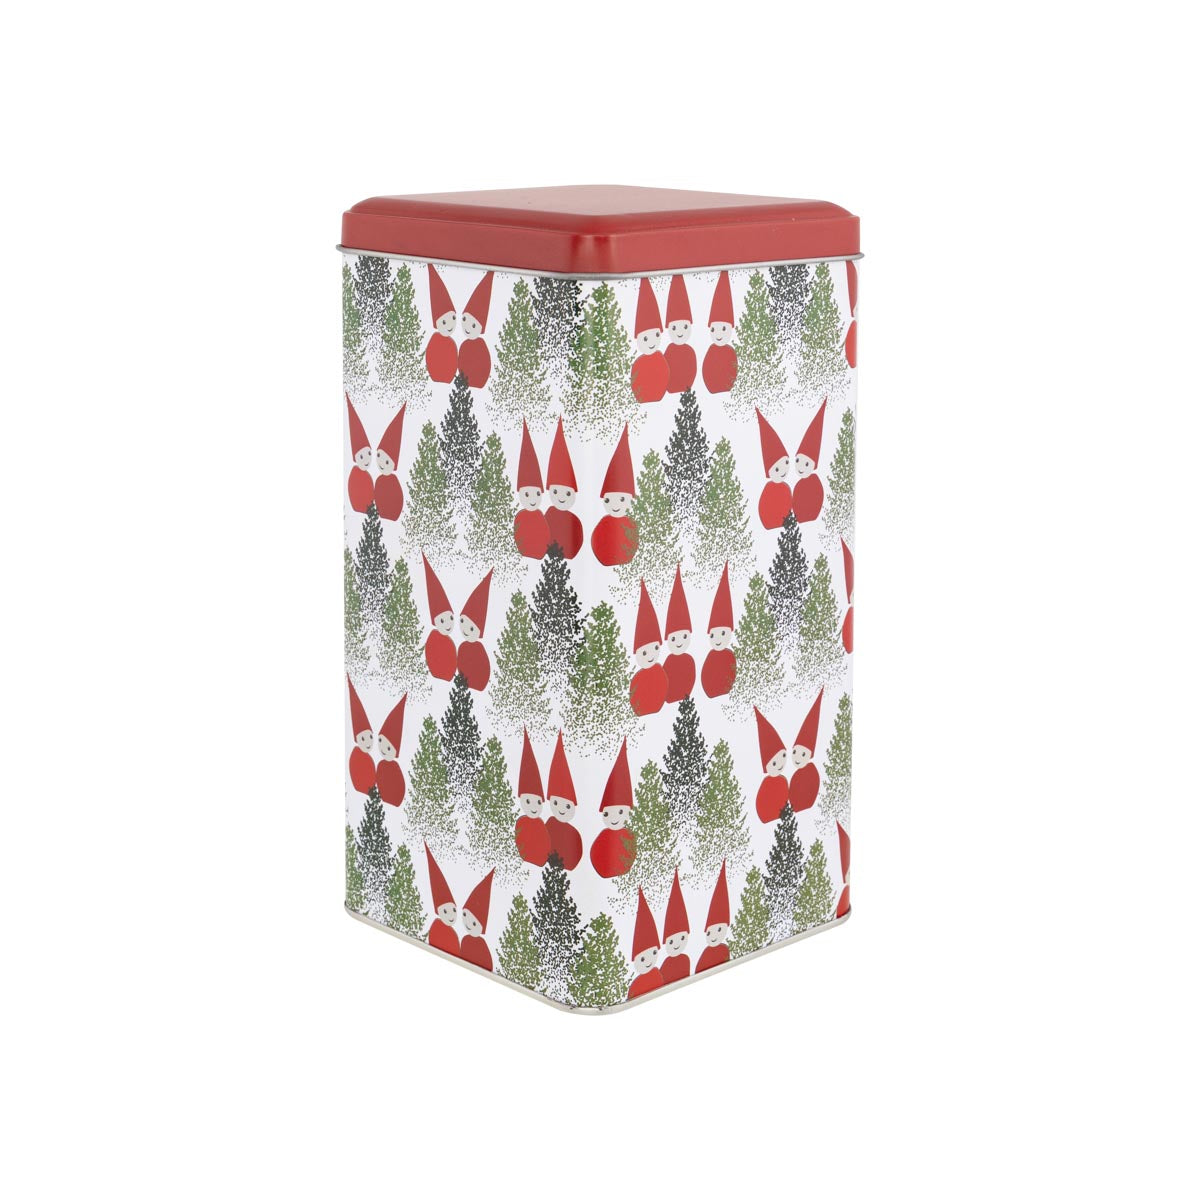 Coffee box, Elves in the Forest, 19 cm, red, white, and green